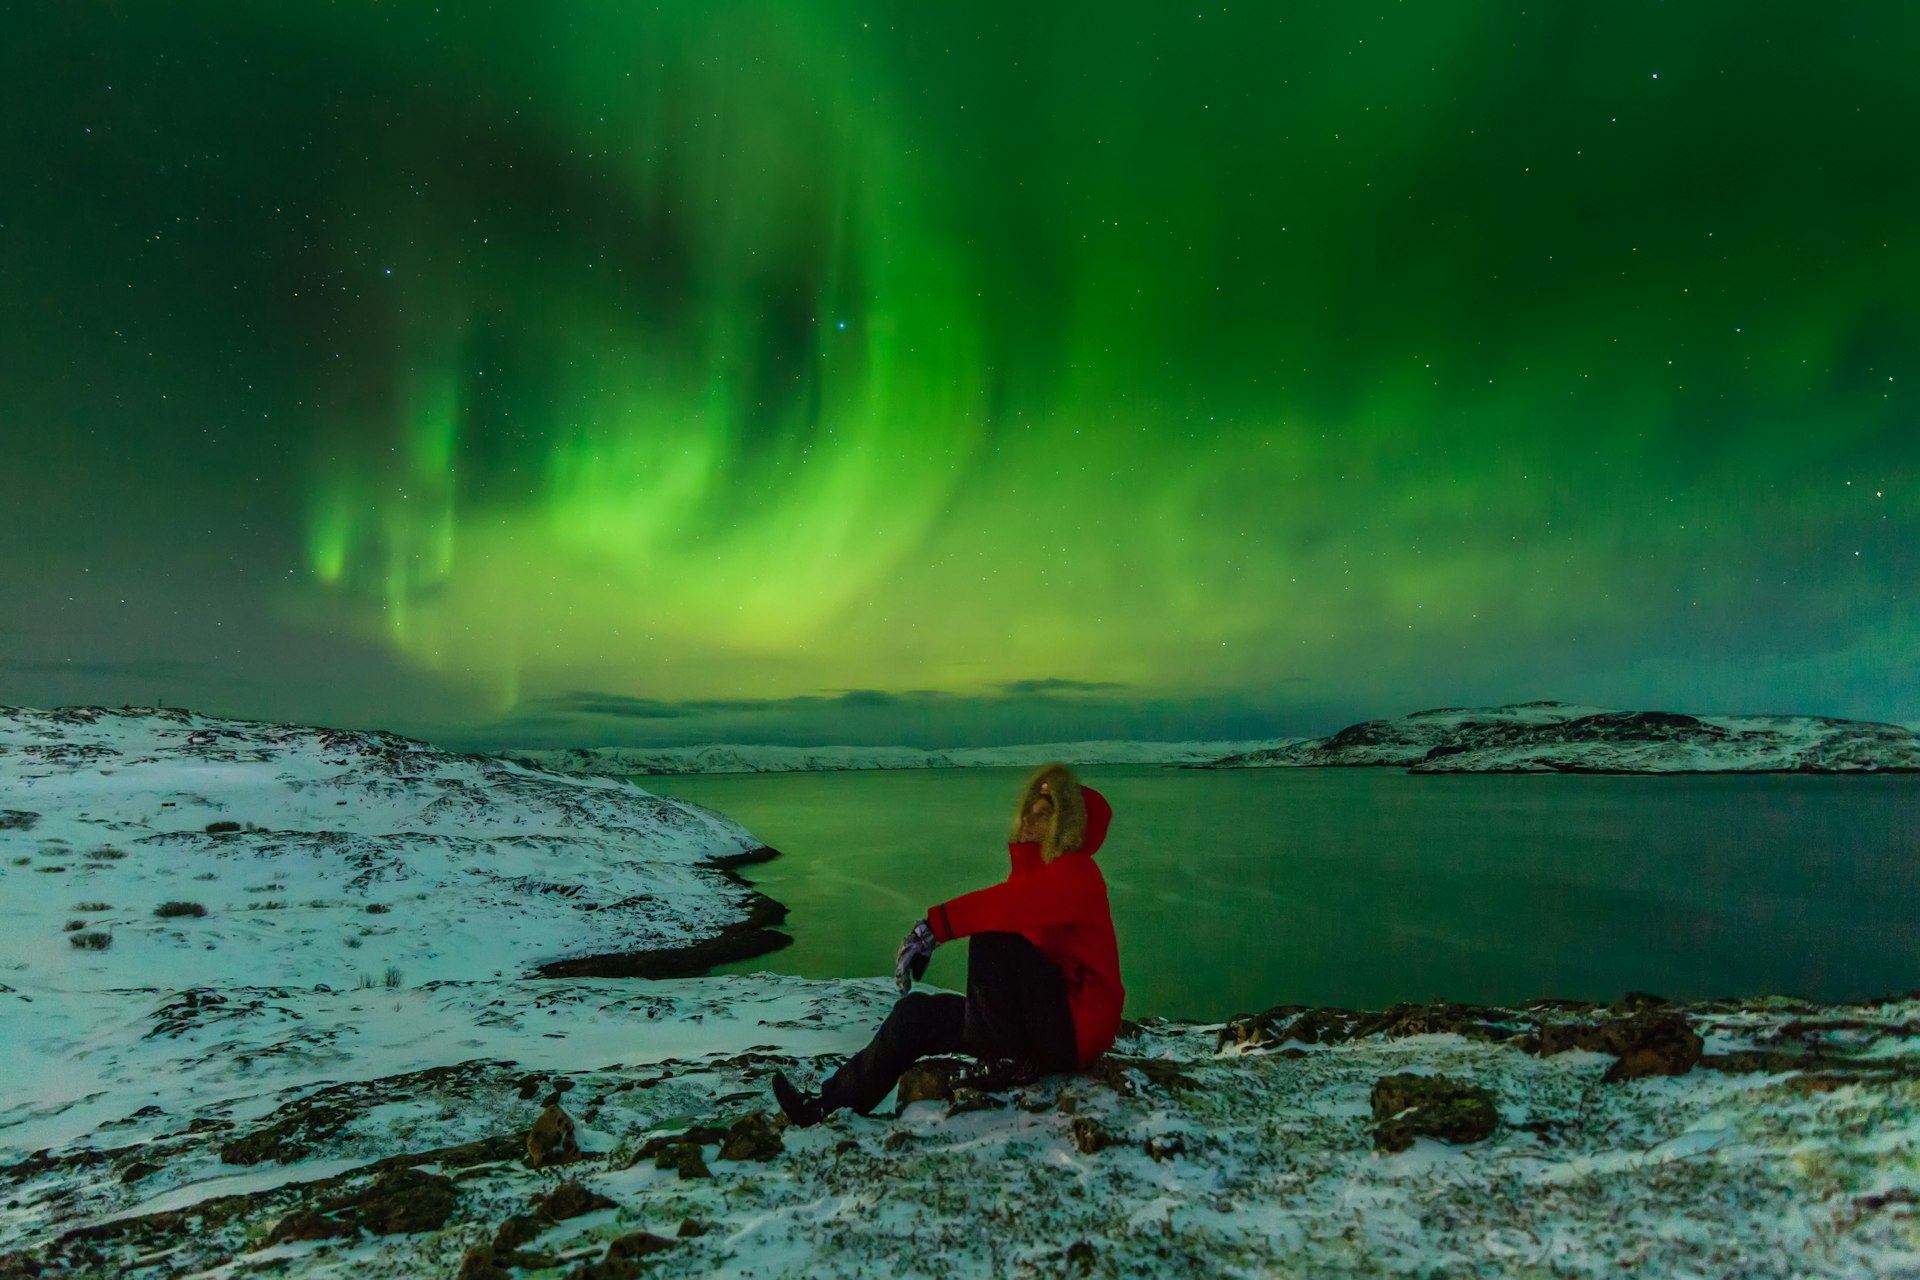 Man in a red jacket on a background of the Northern Lights, Finland